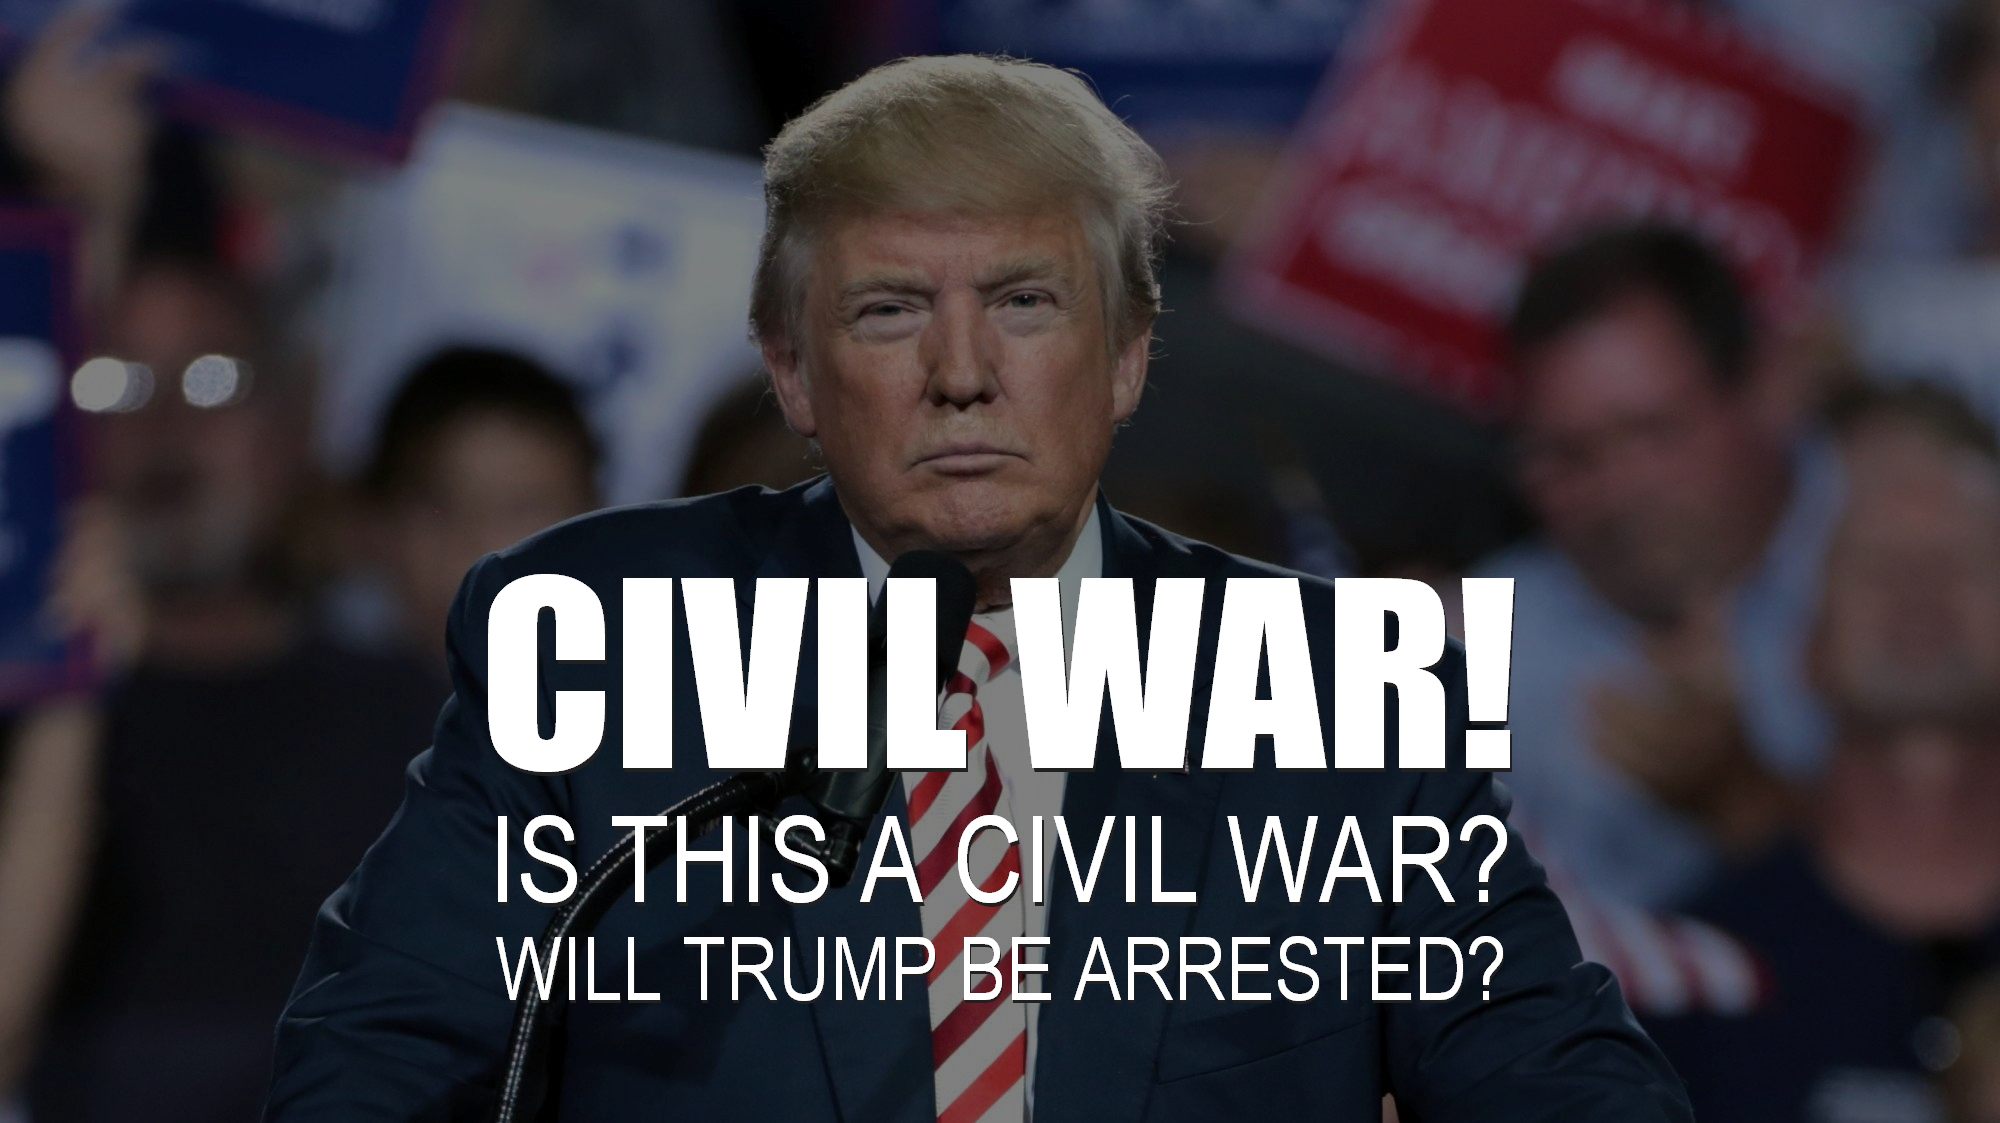 Has Trump been subpoenaed, indicted or arrested? Is this a civil war?